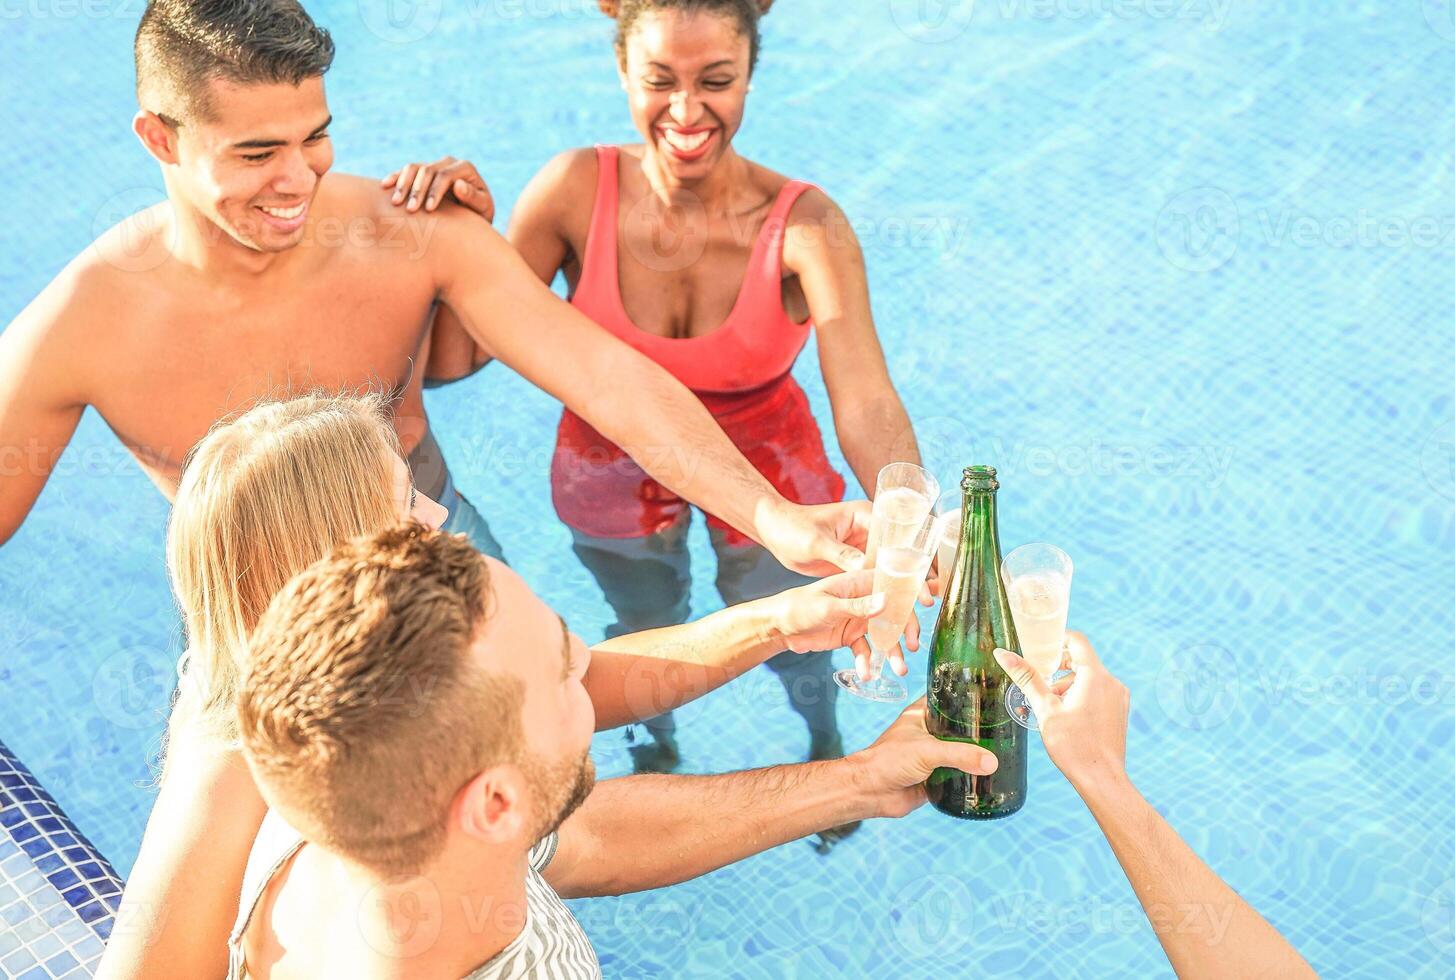 Happy friends cheering with champagne in the pool - Young people having fun making a party and toasting glasses of prosecco - Vacation, holiday, friendship lifestyle concept photo